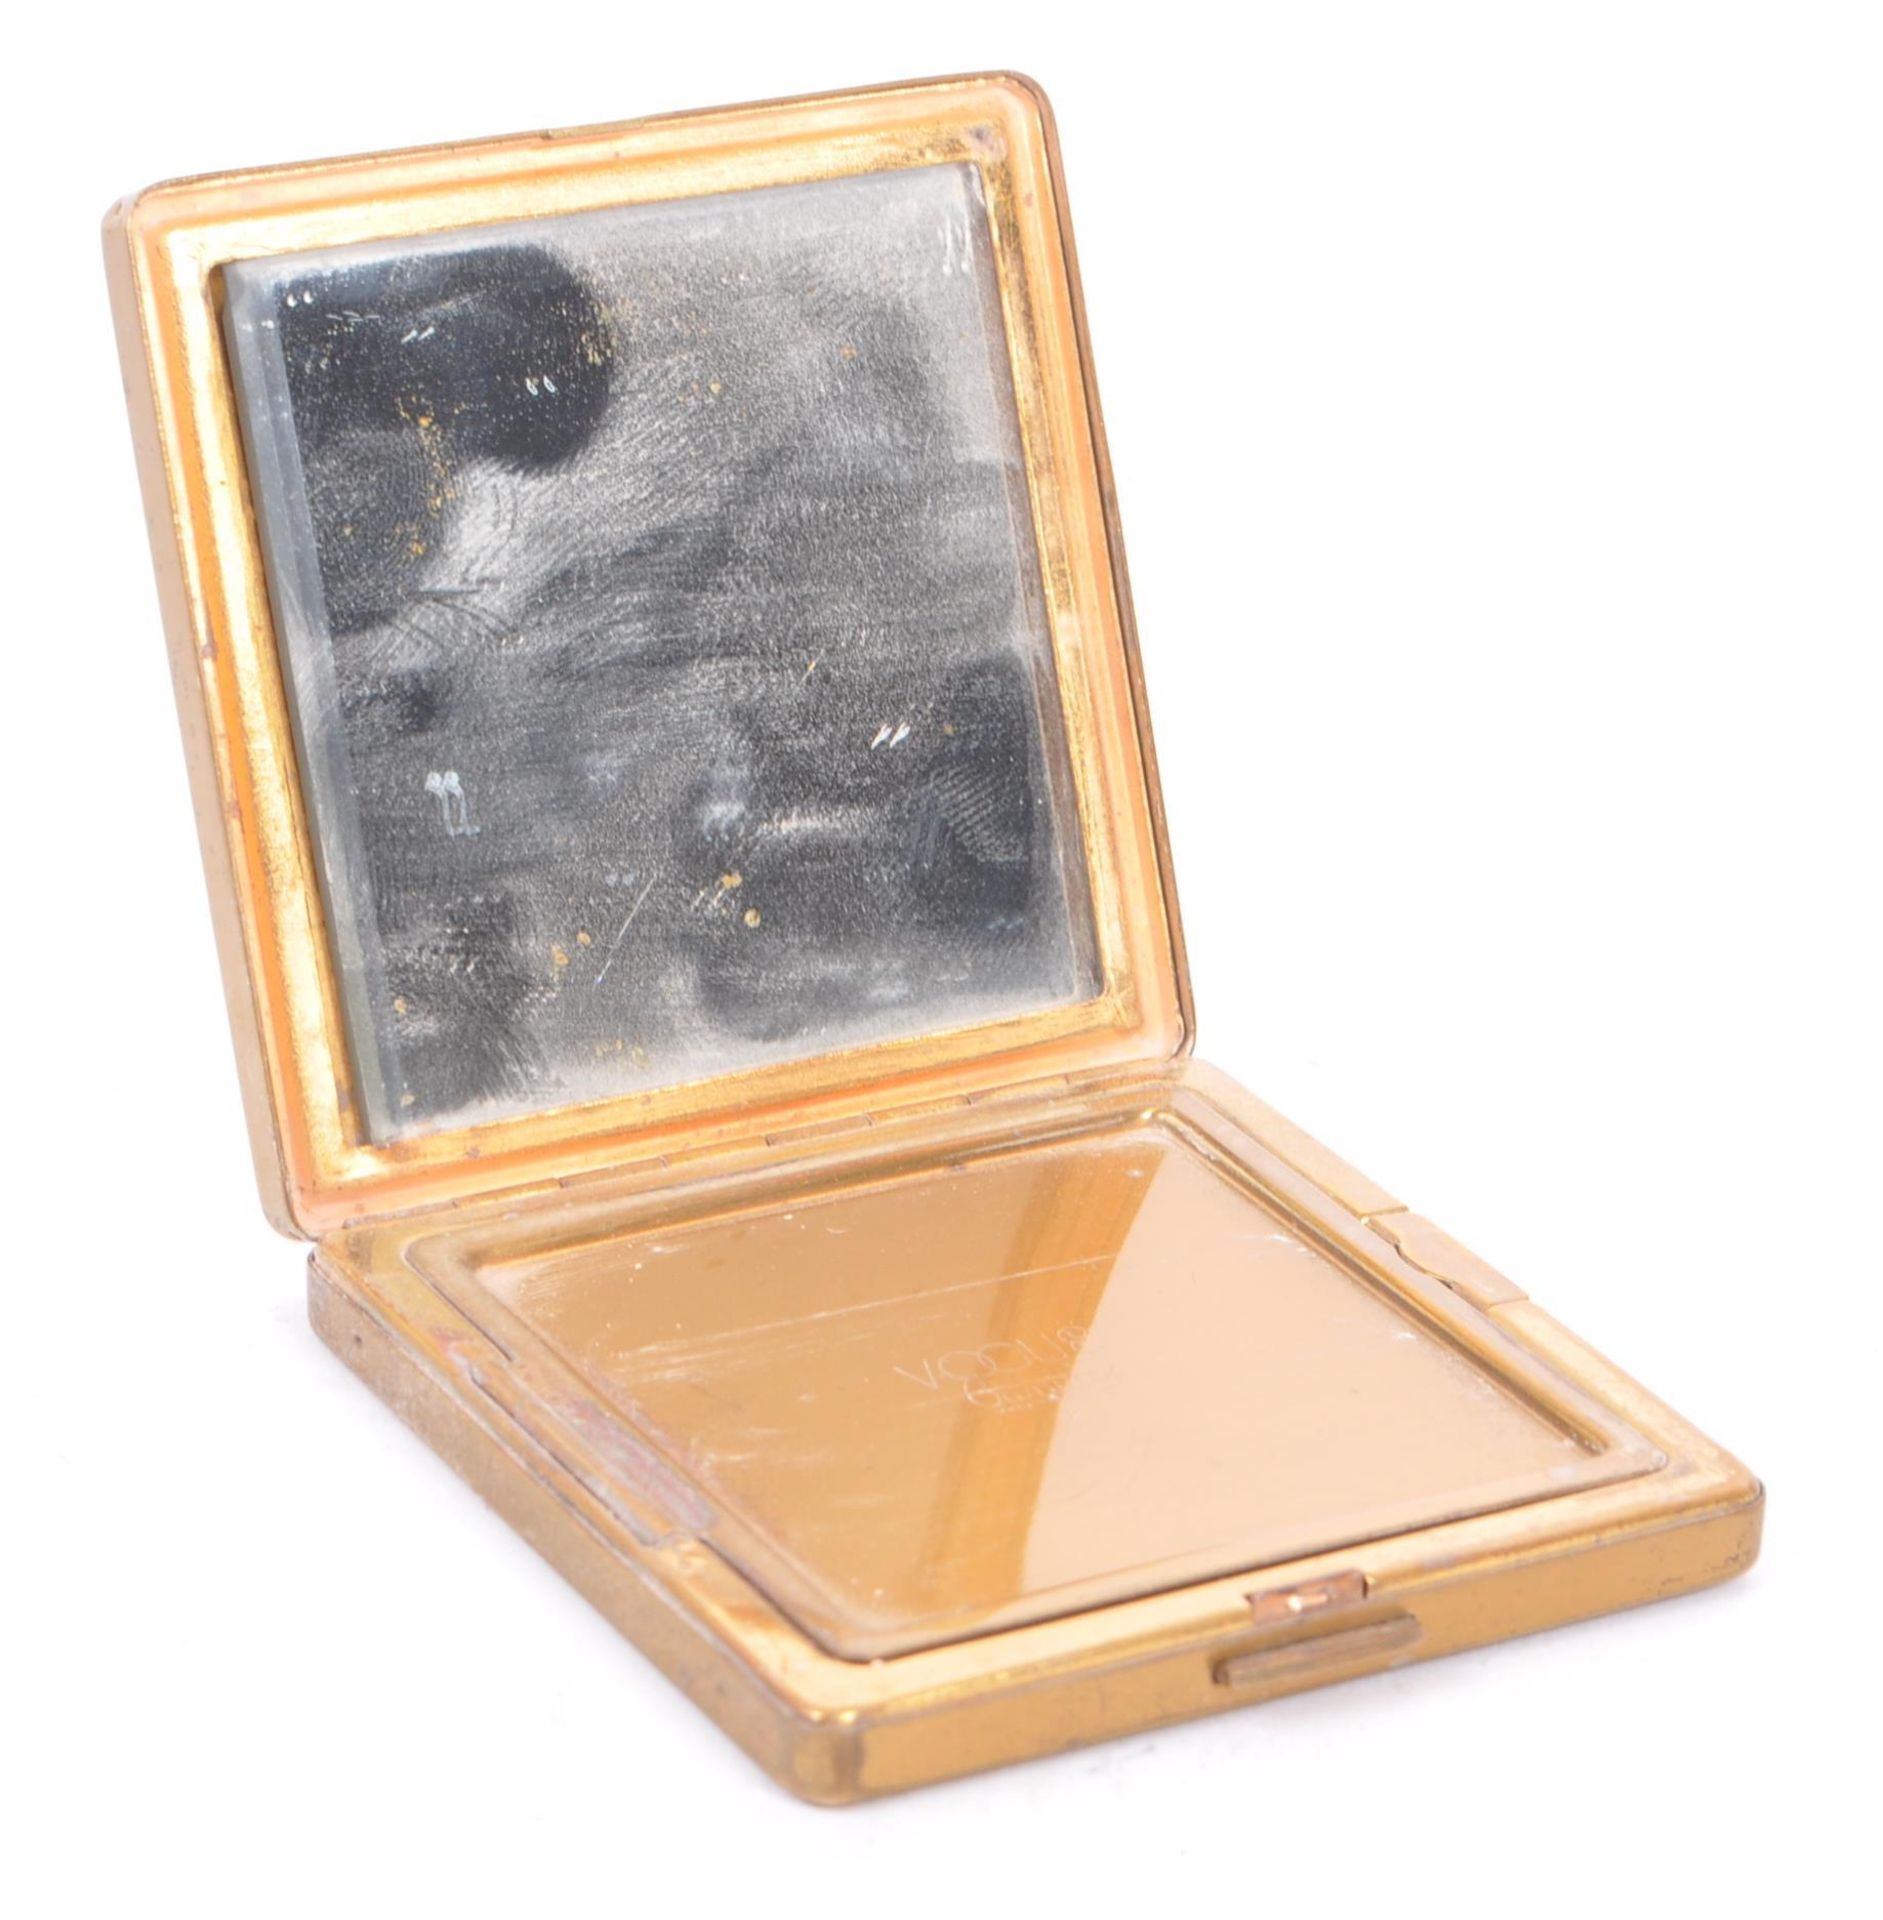 COLLECTION OF 20TH CENTURY VINTAGE VANITY COMPACTS - Image 9 of 10